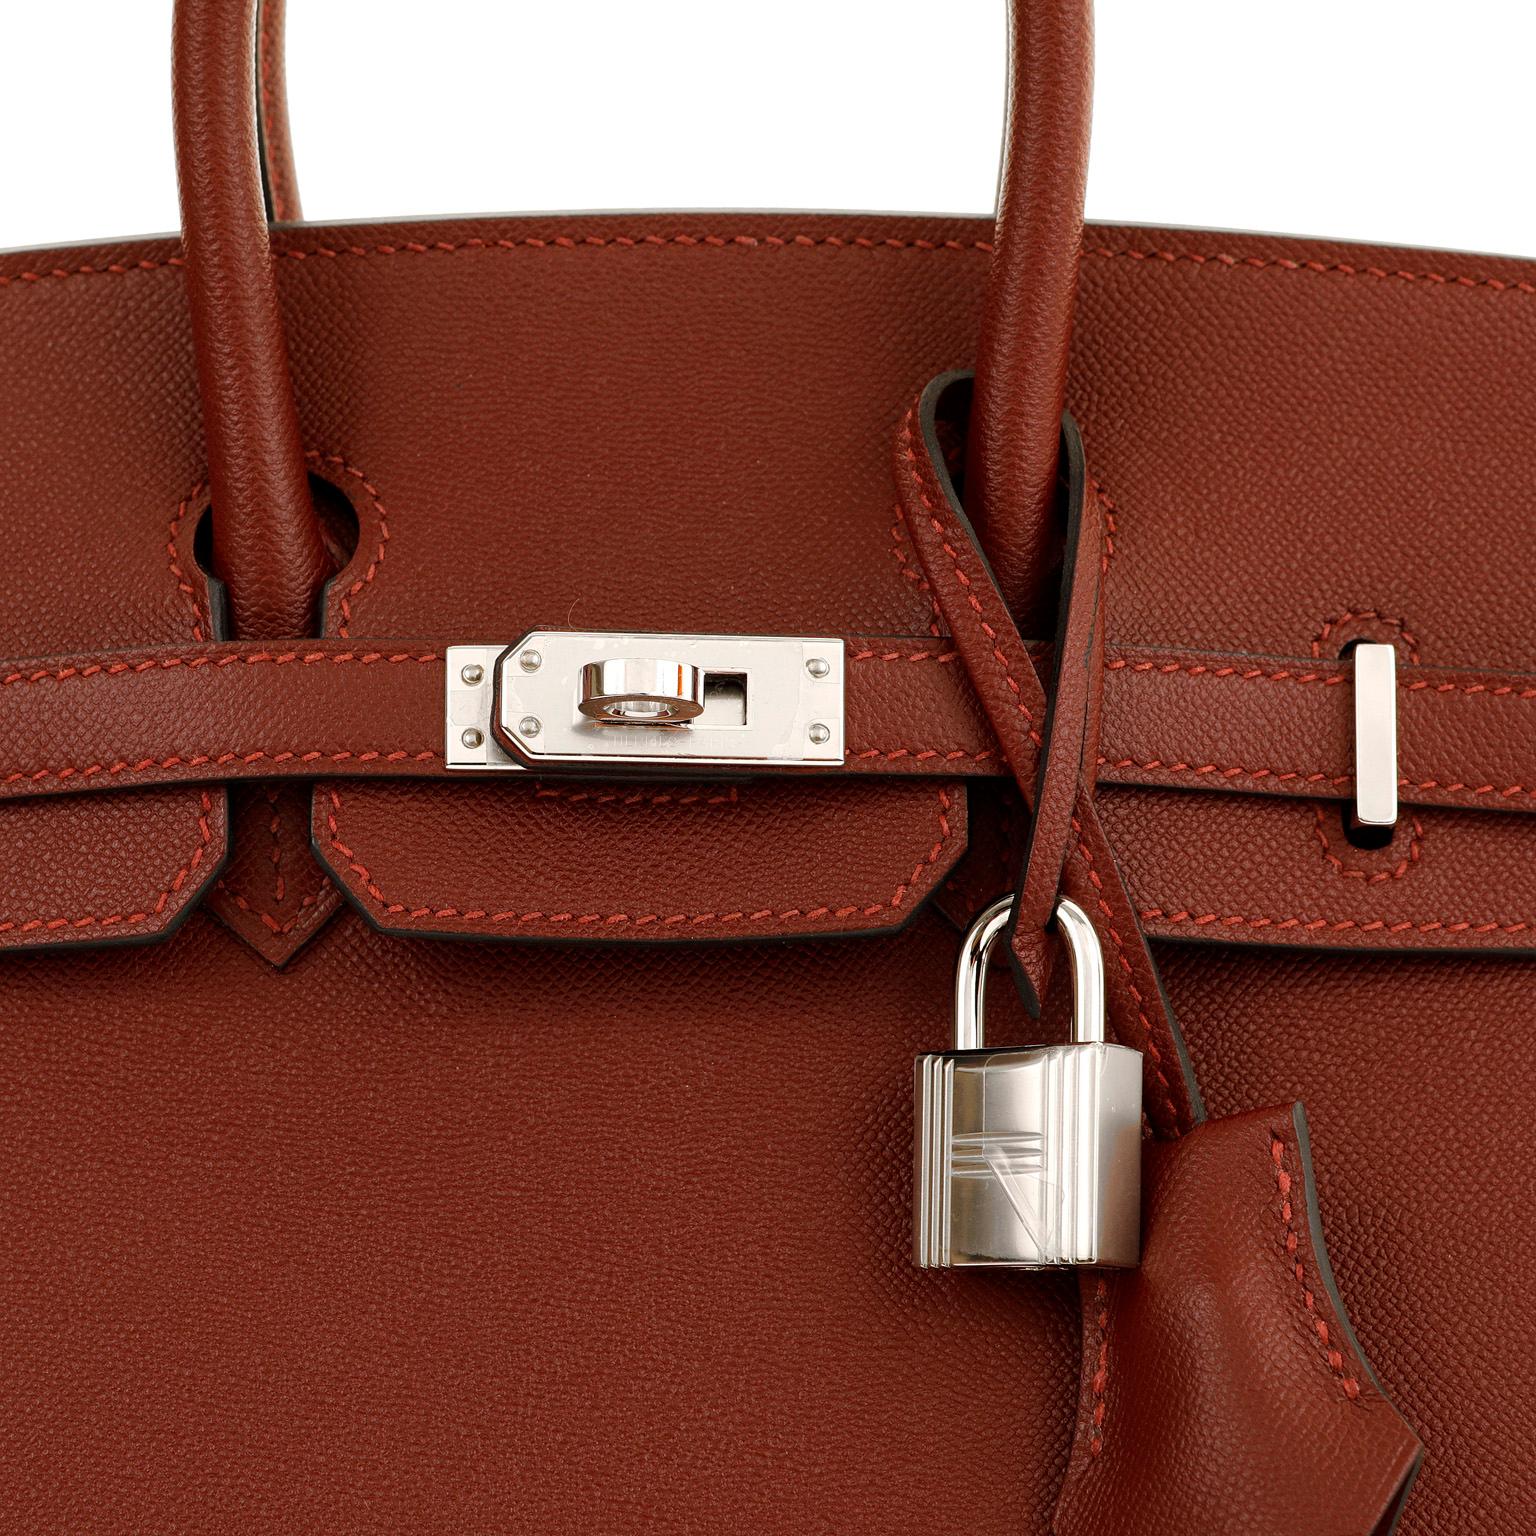 This authentic Hermès 25 cm Bordeaux Epsom Sellier Birkin is in pristine unworn condition; the protective plastic is still intact on the hardware.    Considered the ultimate luxury item, the Hermès Birkin is stitched by hand. Waitlists are